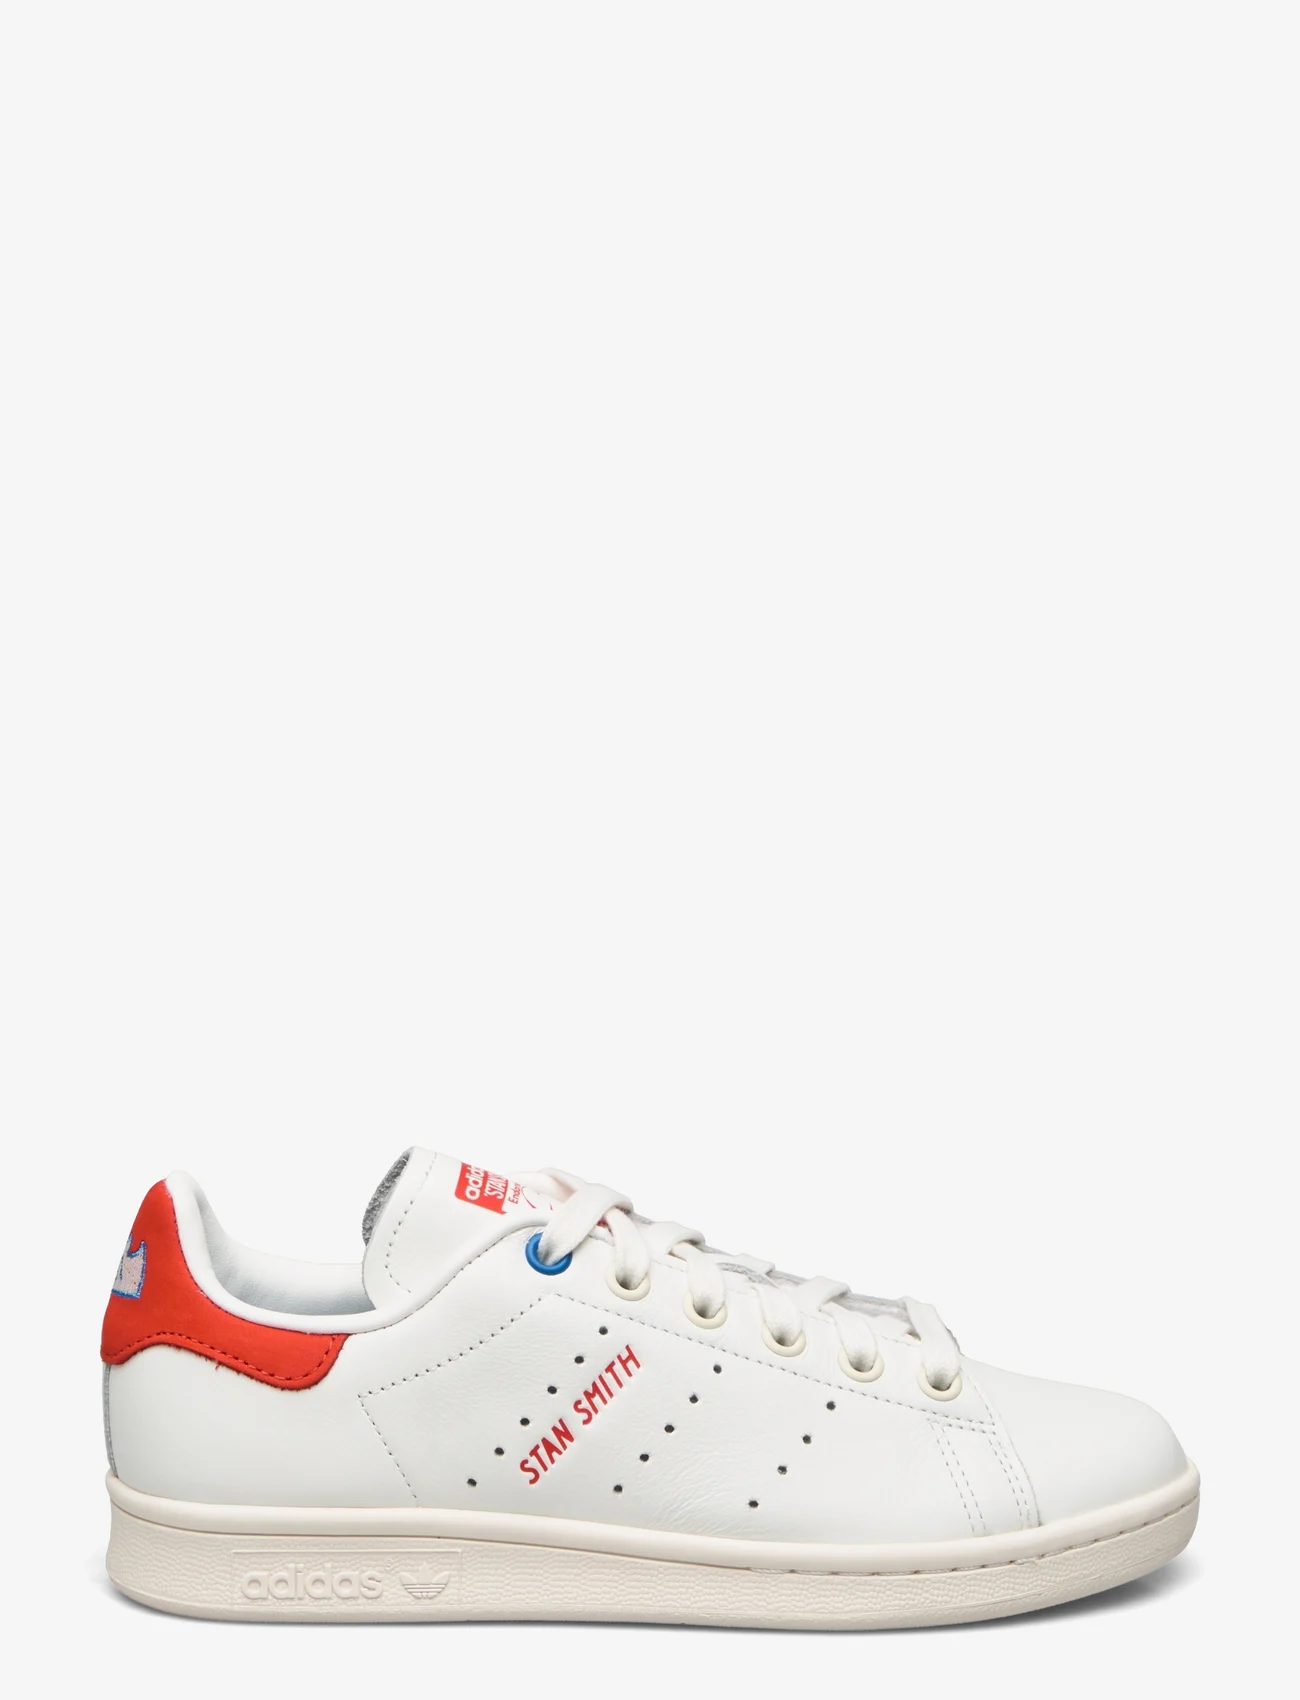 adidas Originals - STAN SMITH W - lave sneakers - cwhite/red/brblue - 1